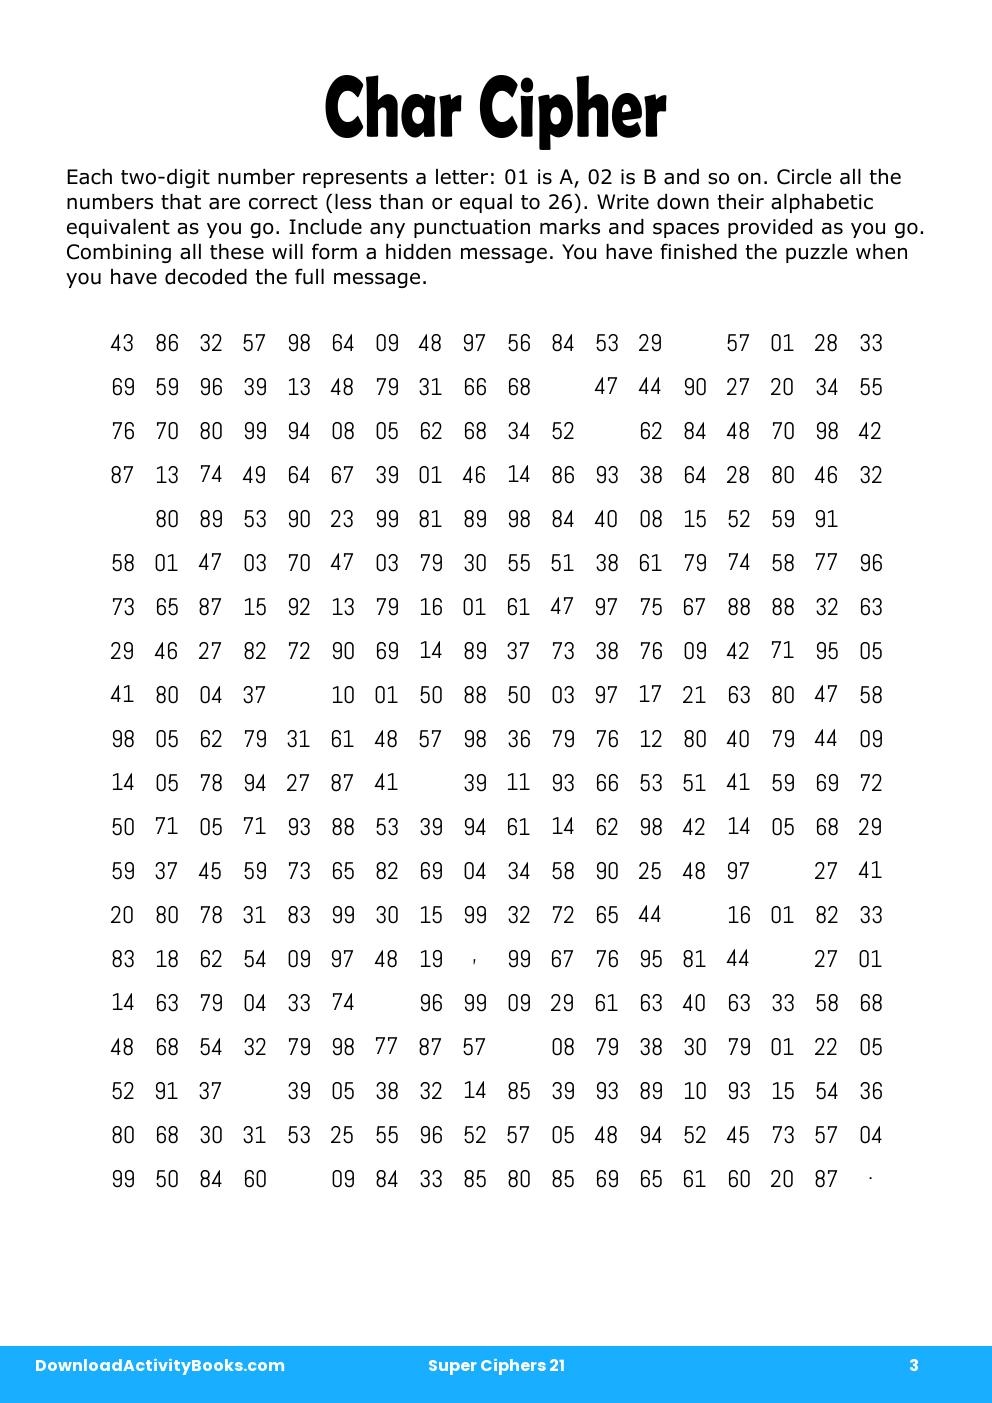 Char Cipher in Super Ciphers 21